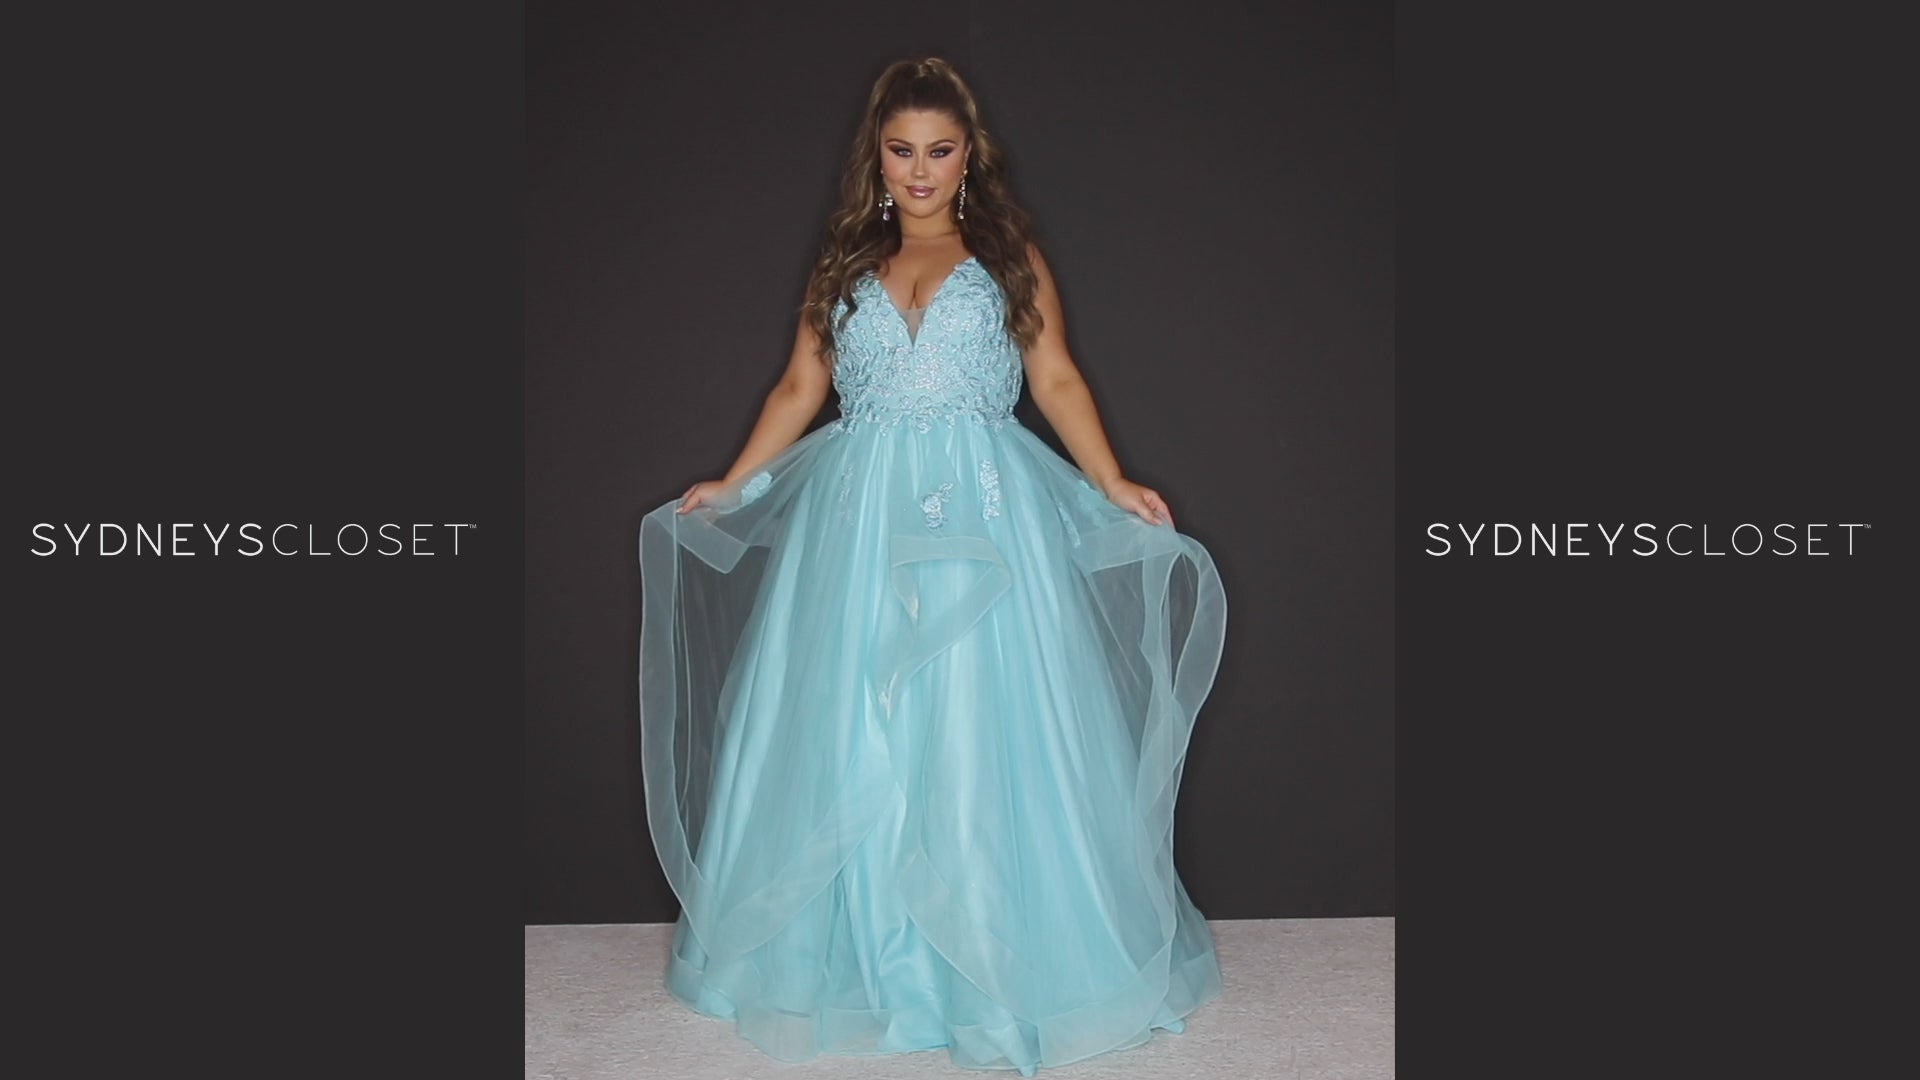 Sydney’s Closet SC7347. Tulle ballgown with lace appliques on bodice. Offered in light blue, coral, light pink and lilac purple. Has a V-neckline, bra-friendly straps and a natural waistline. A tried tulle skirt with horsehair hem. Invisible back zipper